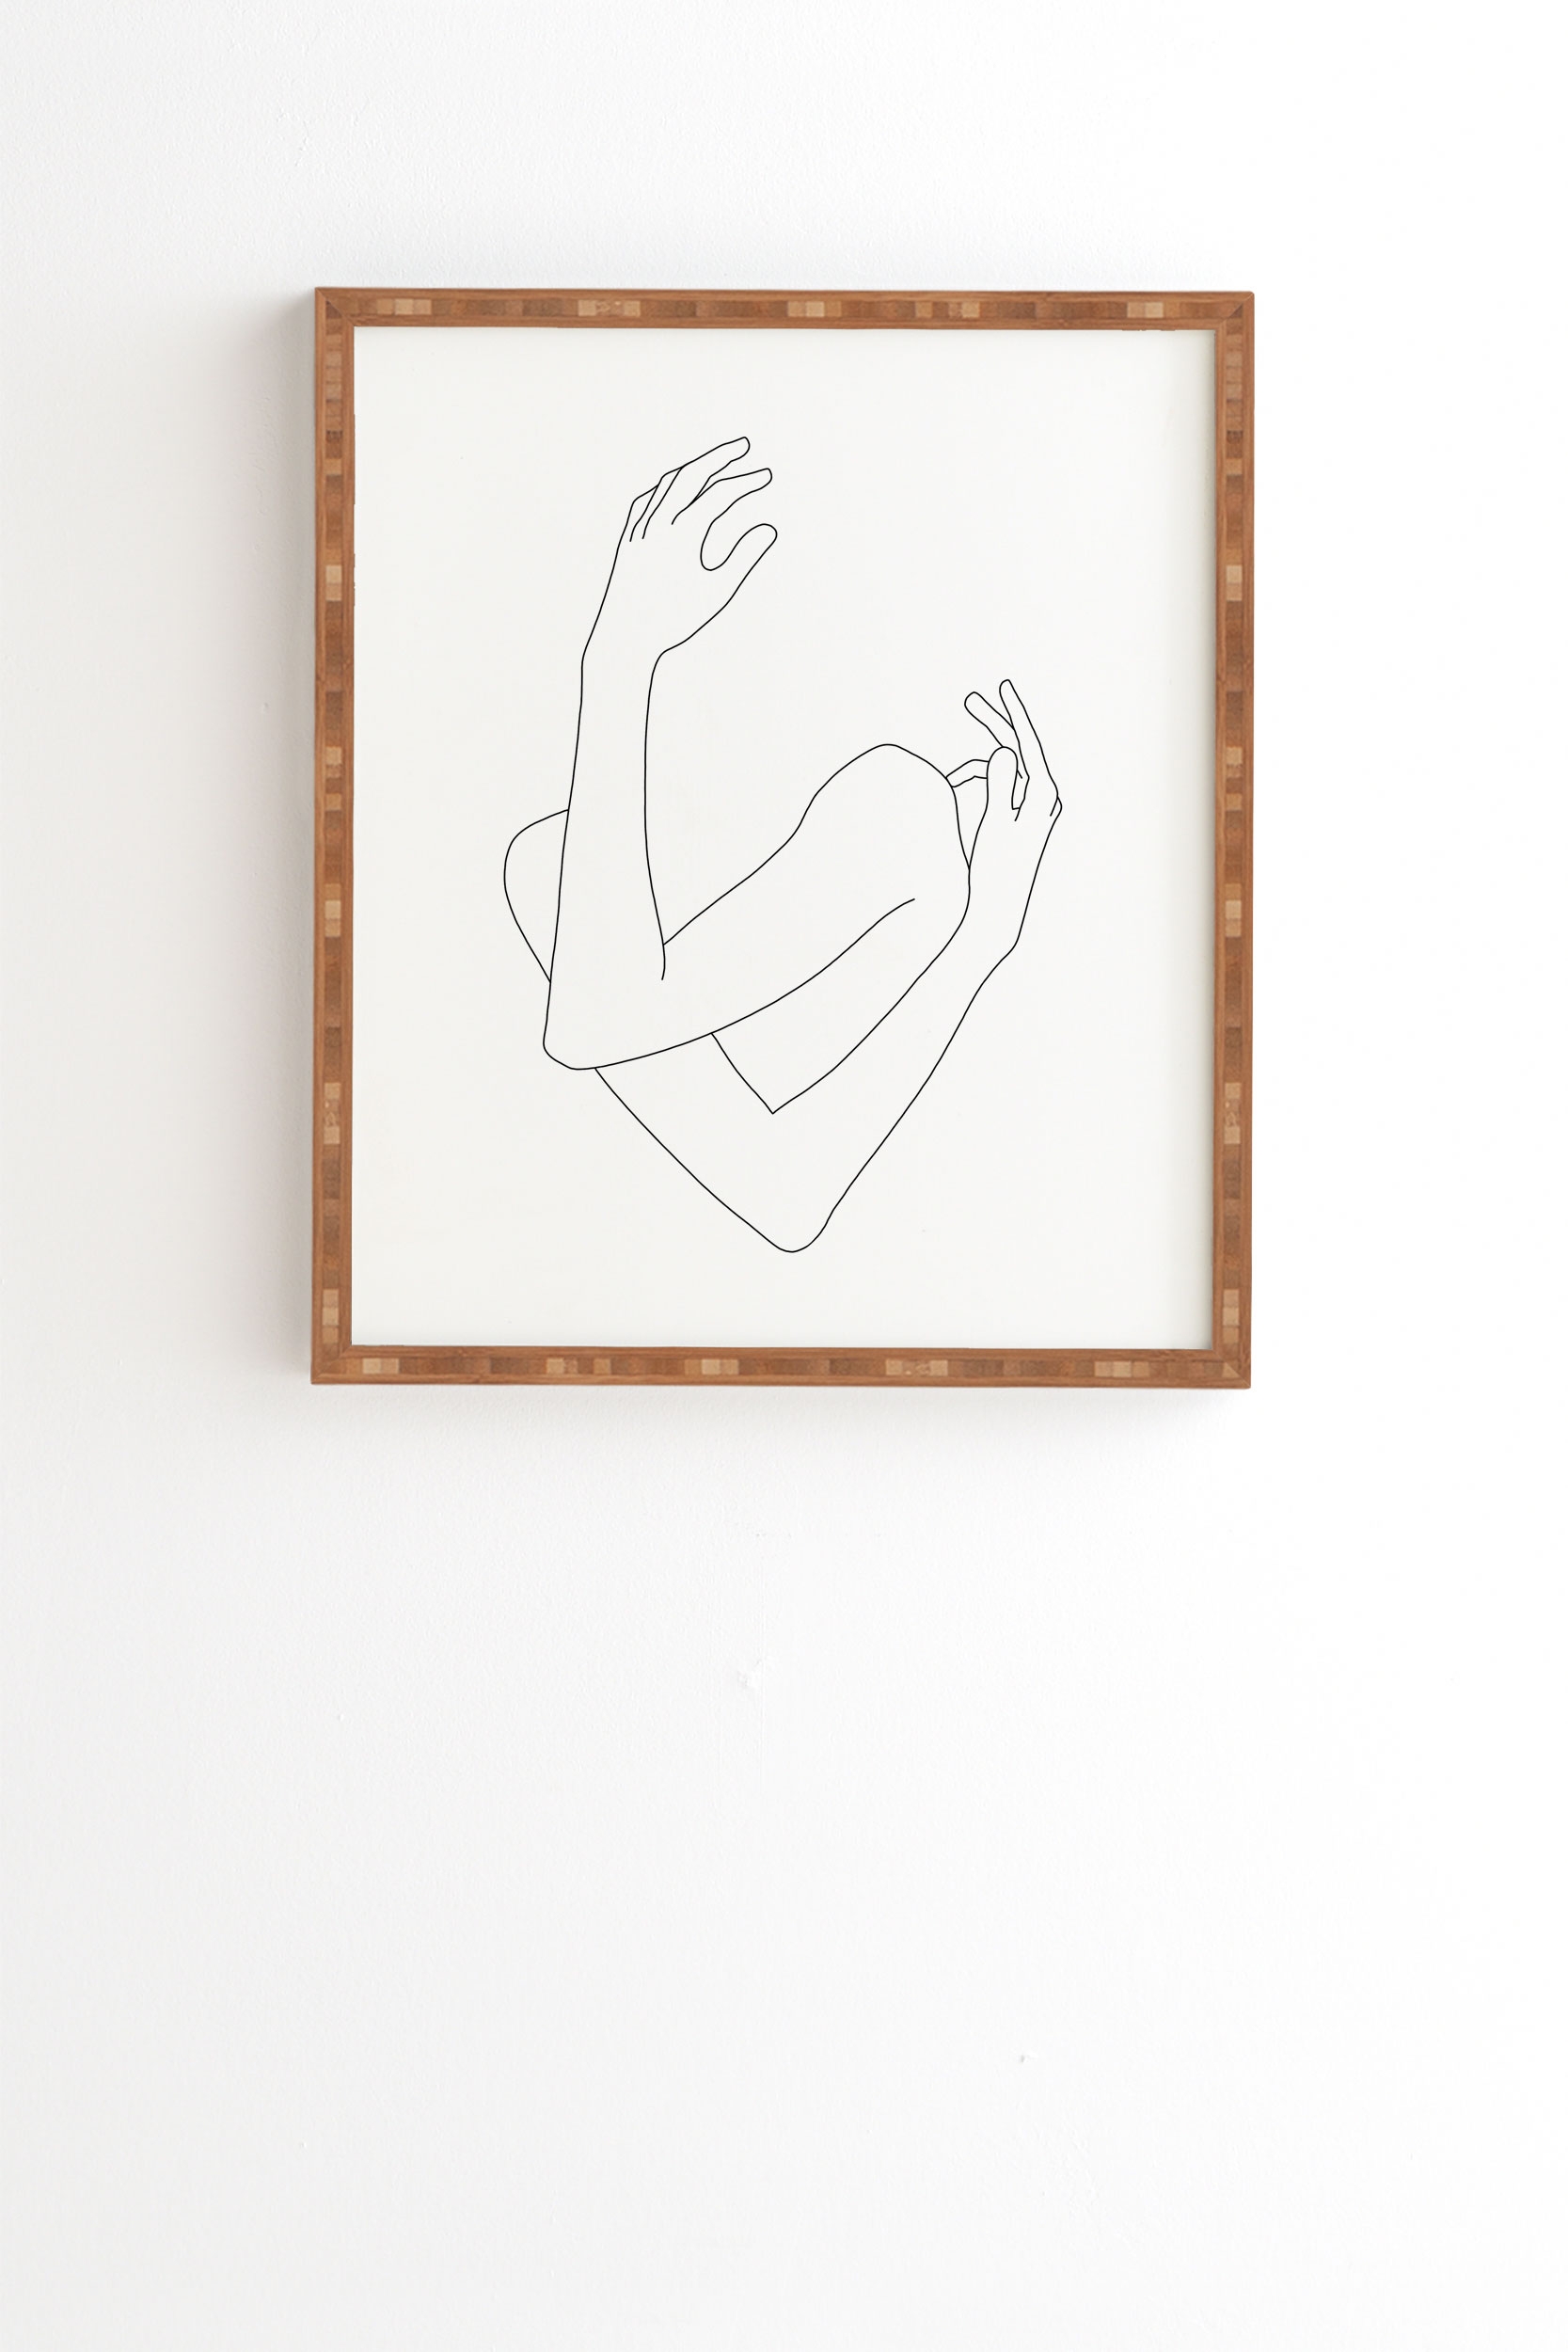 Crossed Arms Illustration Jill by The Colour Study - Framed Wall Art Bamboo 19" x 22.4" - Image 0